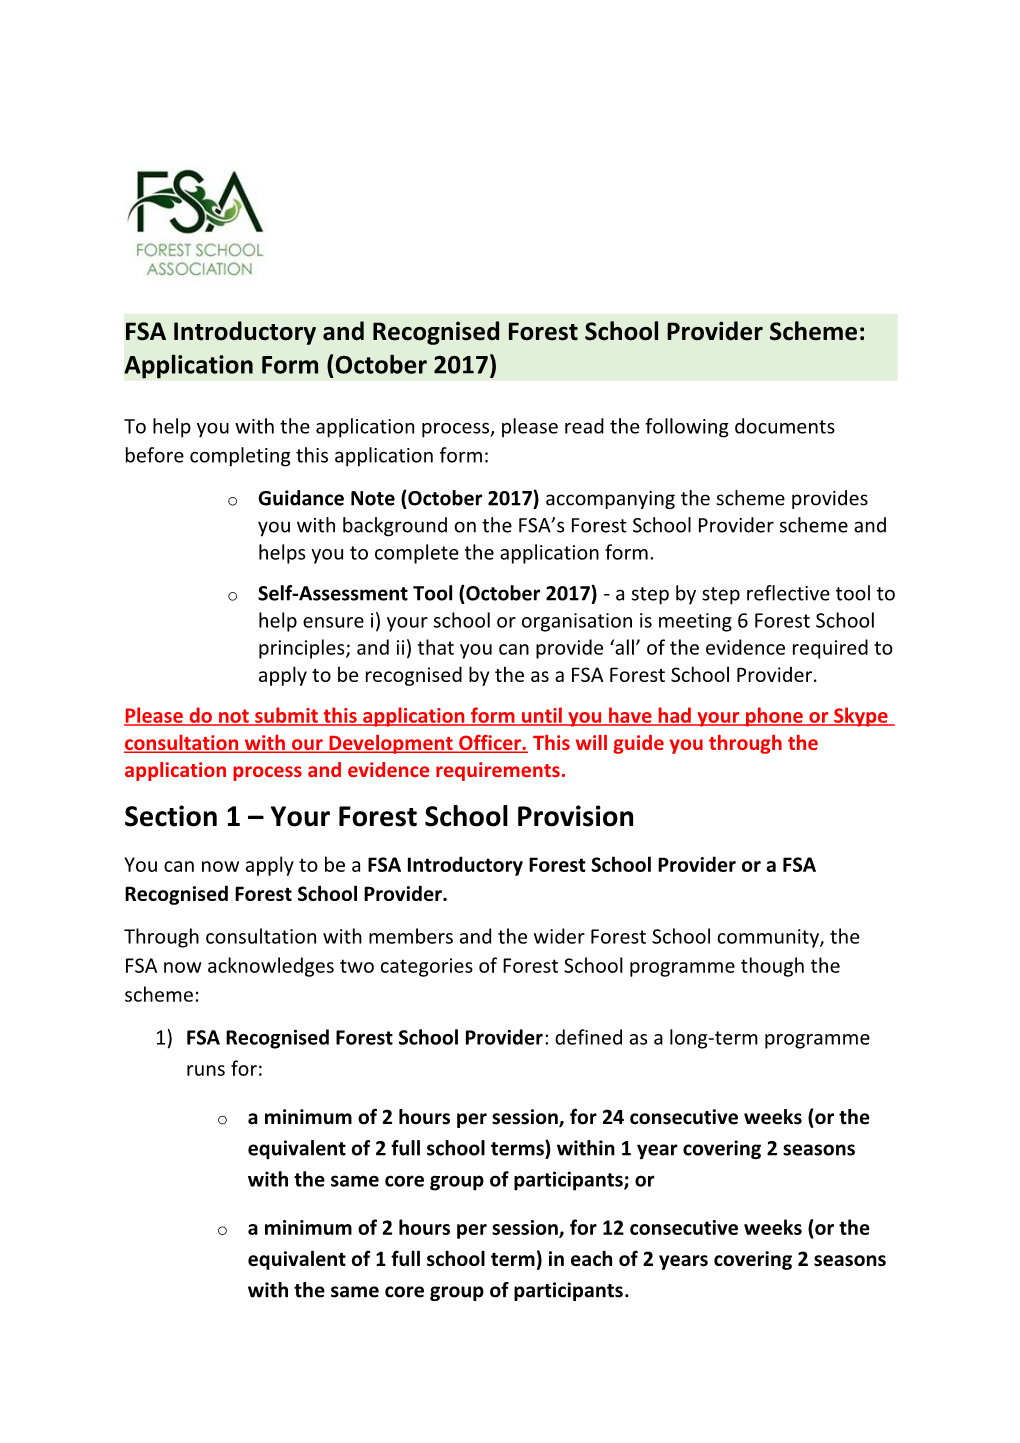 FSA Introductory and Recognised Forest School Provider Scheme